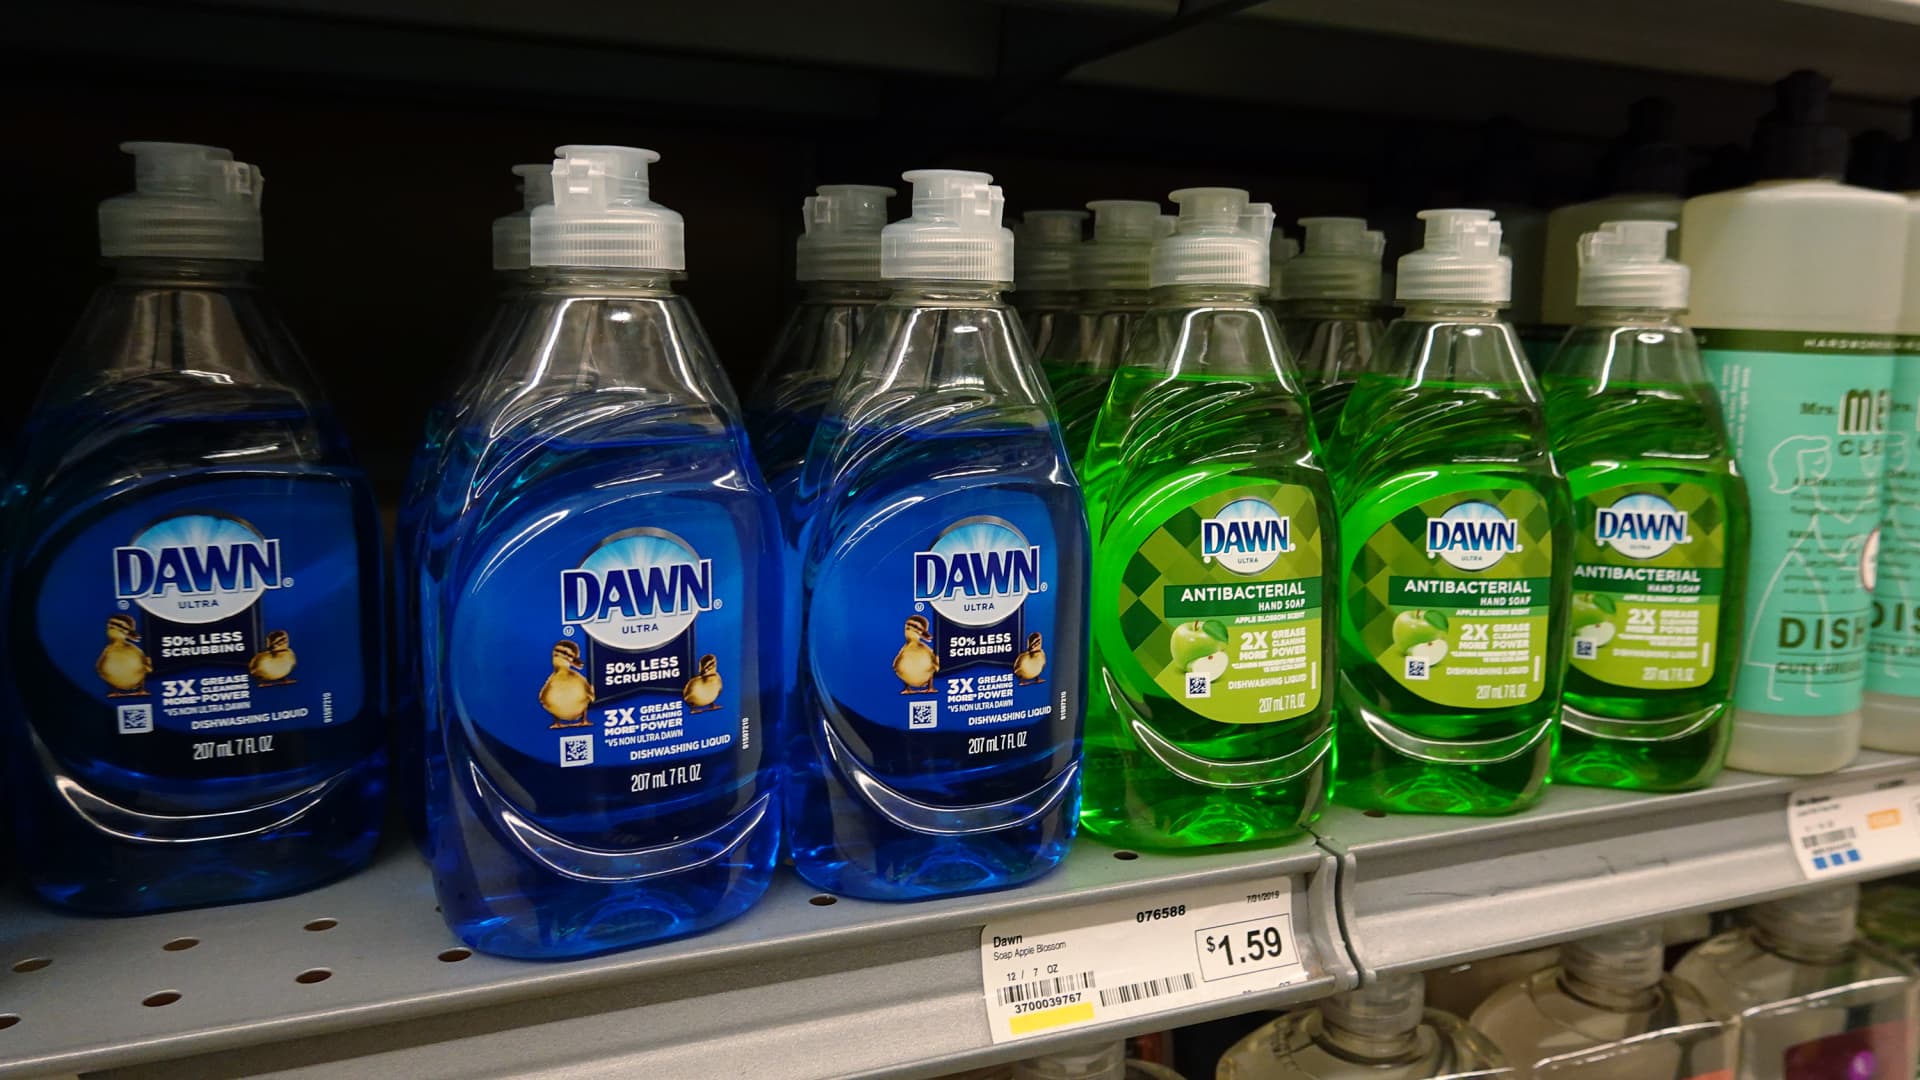 Stocks of Johnson & Johnson, Kimberly-Clarke and Procter & Gamble( — which makes many consumer staple products such as Dawn dish soap — may have hit a valuation ceiling.